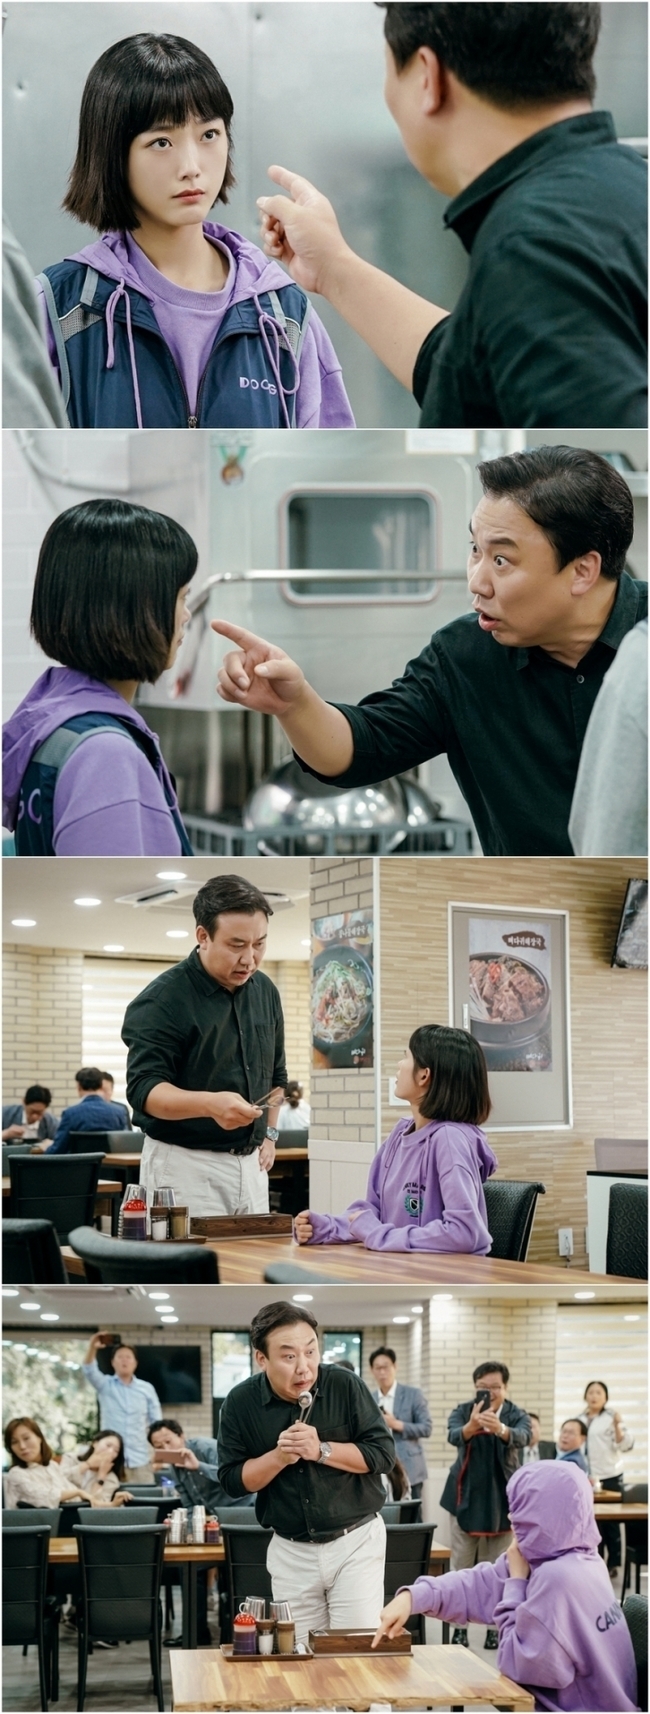 Lee Yoo-Mi shows off relationship reversal training.JTBC TOILDrama  ⁇  Strong Girl Namsoon (playwright Baek Mi-kyung / director Kim Jung-sik and Lee Kyung-sik) released Kang Nam-sun (Lee Yoo-Mi)In the last broadcast, Kang Nam-sun and Kang Hui-sik (played by Ong Sung-woo) began to cooperate; Kang Hui-sik learned that the additional deaths were related to masks that dissolve in water.After receiving an anonymous tip from Golden Week (Kim Jong Eun) that there was a drug in the past, he decided to investigate The Mole Song: Undercover Agent Reiji. ⁇ Superpower  ⁇  Kang Nam-sun and Kang Hui decided to deliver during the day and find a drug at the warehouse at night. I wonder if the two will succeed in their first mission.Kang Nam-sun, who is undercover agent Reiji, is in Kang Hui-sik and Dugo to find the drug.In the place where he went to deliver the courier service, he faced the president of Restaurant (Kwak Jae-hyung), who is a true customer. Kang Nam-sun, who responds with a clear-eyed maniac (clear-eyed maniac)Kang Nam-sun, who took off his uniform and found the restaurant again, then reversed the relationship between Kang Nam-sun and the restaurant president.The contrast between the table split in half and the president of the Restaurant, which causes a sudden earthquake, adds to the laughter. The sight of the restaurant is so unbelievable that the guests in the restaurant are watching them as if they are interested. ⁇  Strong Girl Namsoon  ⁇  The production team said that Kang Nam-sun, who teaches true customers, will give a pleasant smile to the audience. Kang Nam-suns performance is now real.Kang Nam-sun, Kang Hui-siks spectacular cooperation is also expected. It is broadcasted at 10:30 pm on the 21st.